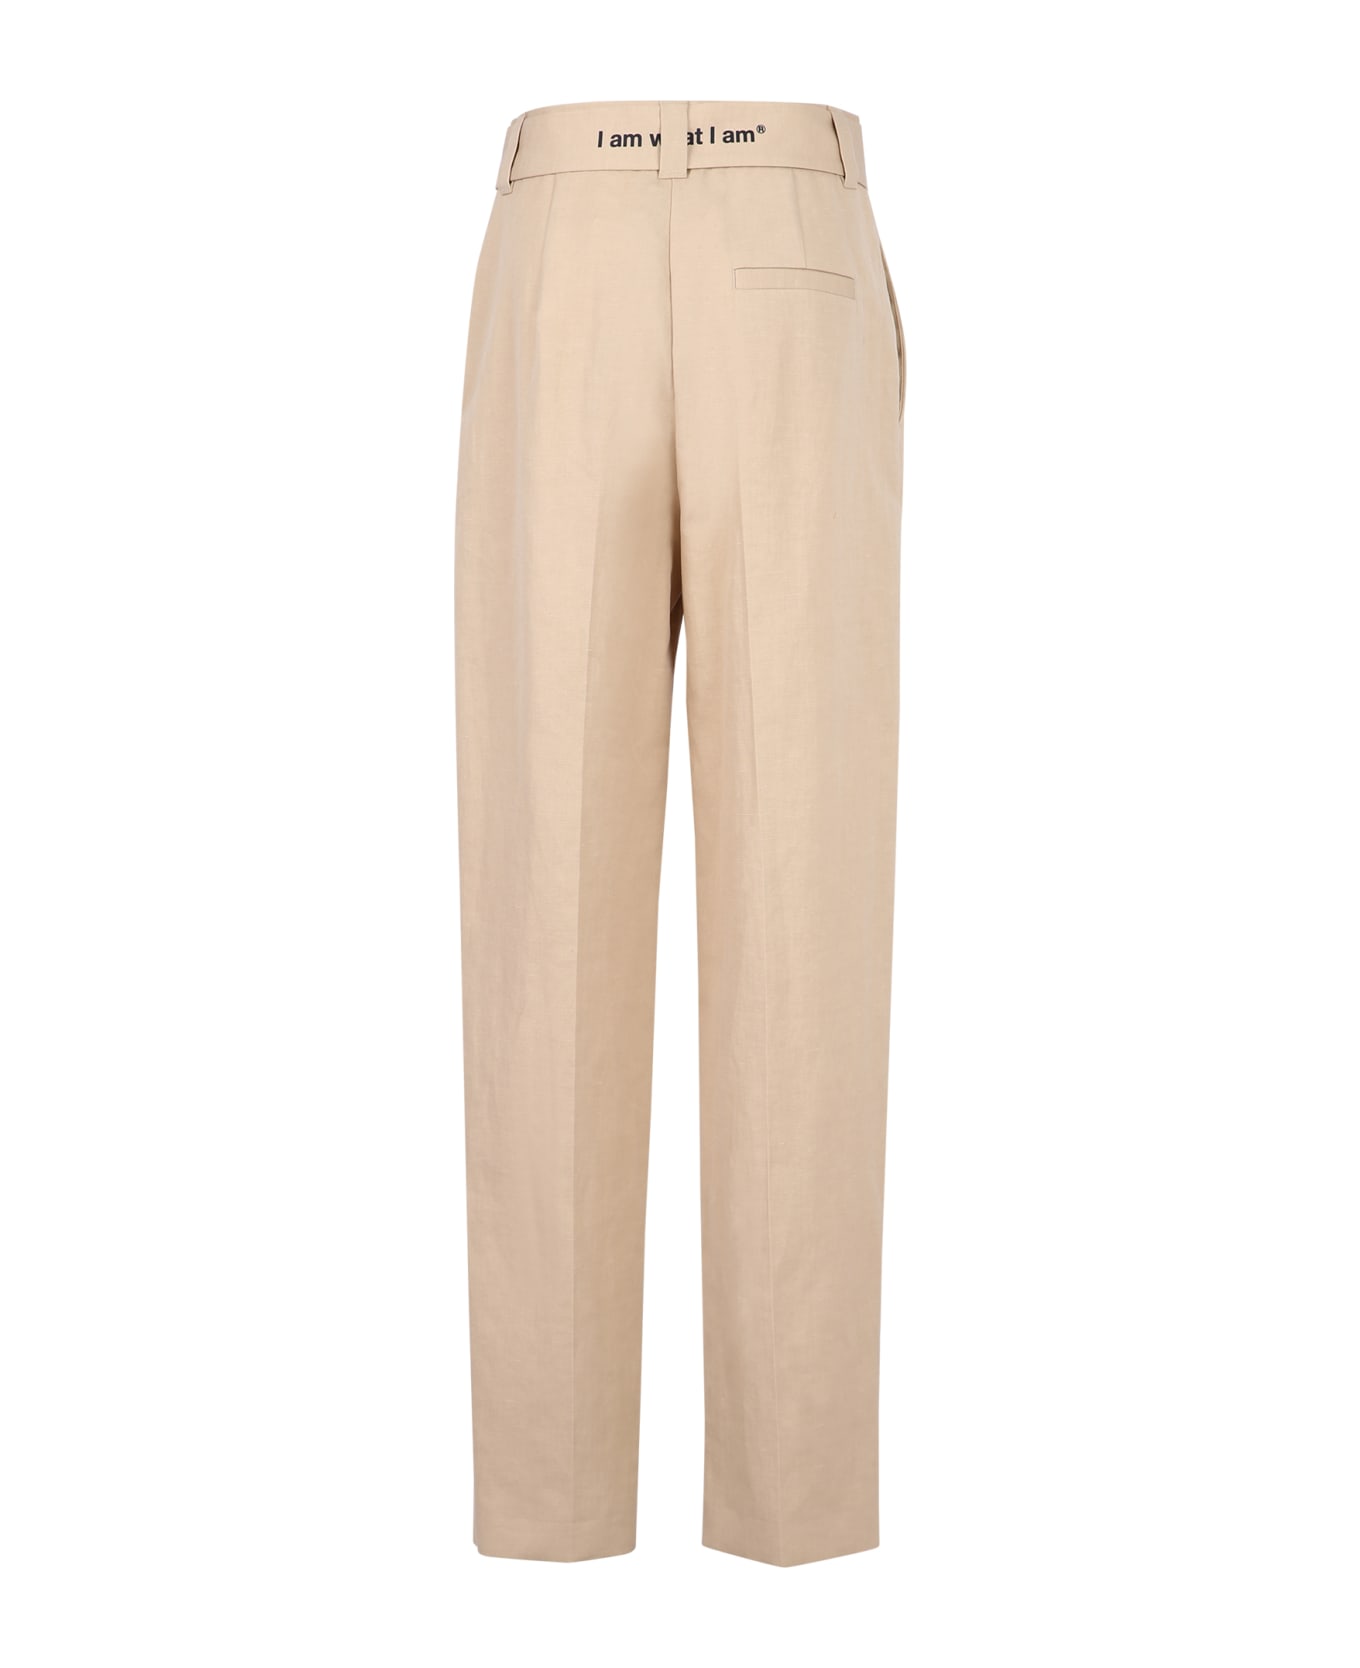 MSGM Belted Trousers - Beige ボトムス